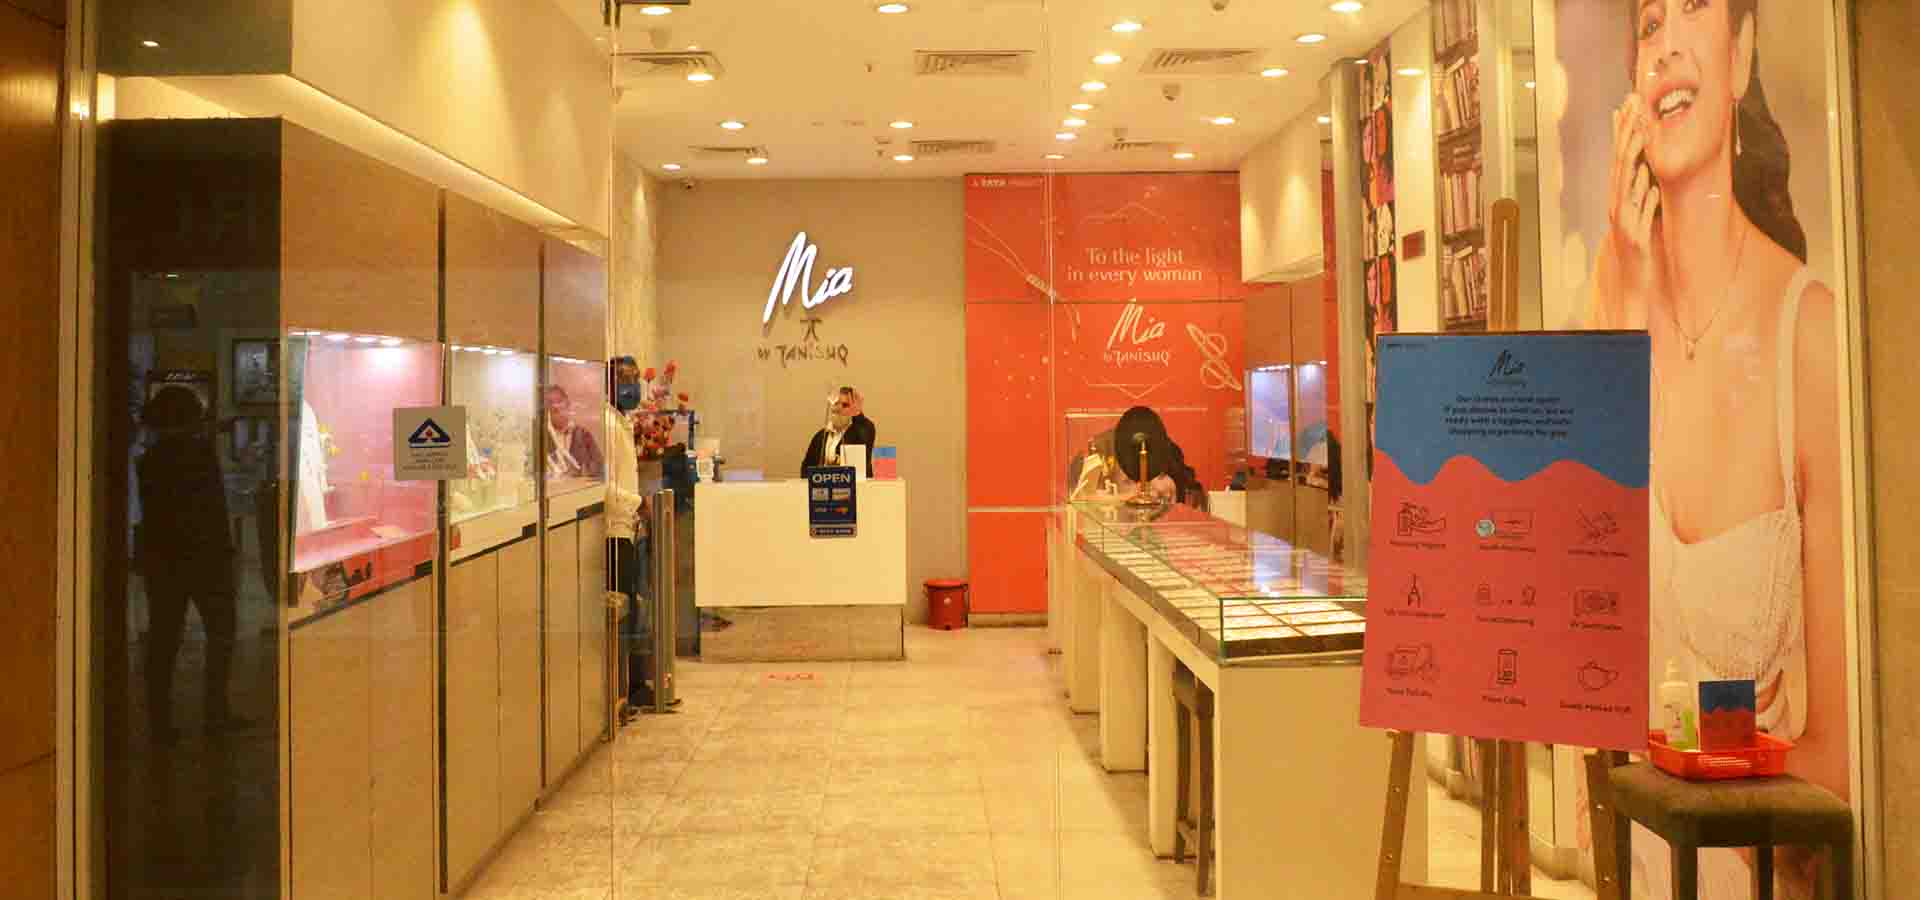 Mia By Tanishq store photos in mall